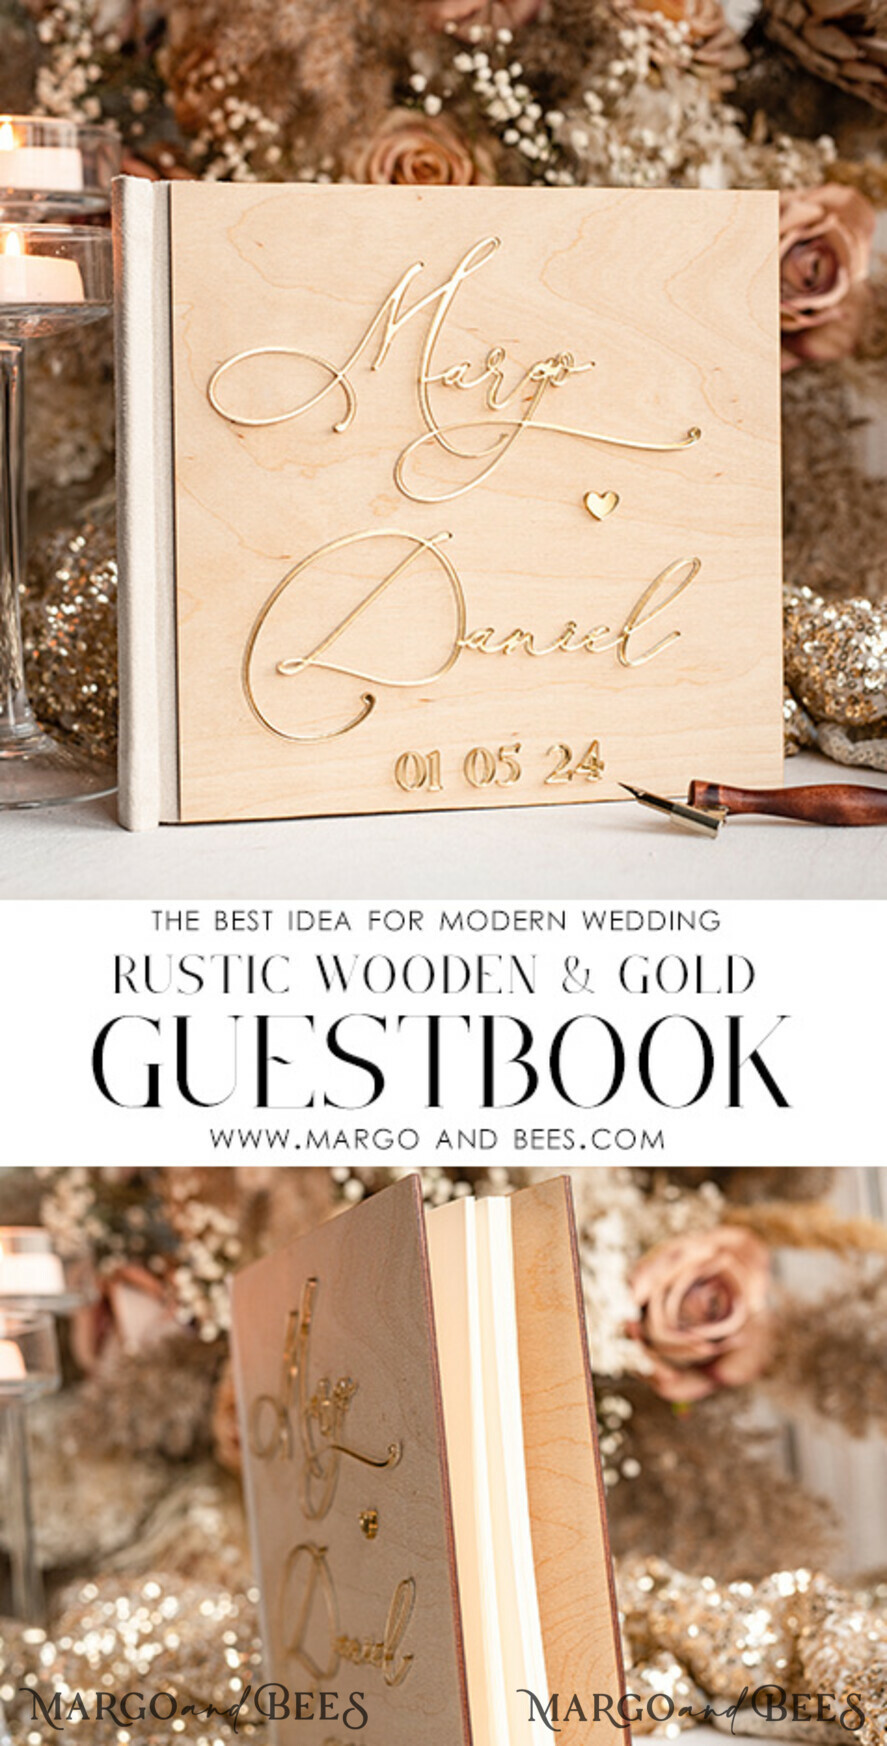 WEdding Combo Guestbook and Photo Album, Guestbook Album Presonalised Pages  with space for Pictures from PhotoBooh